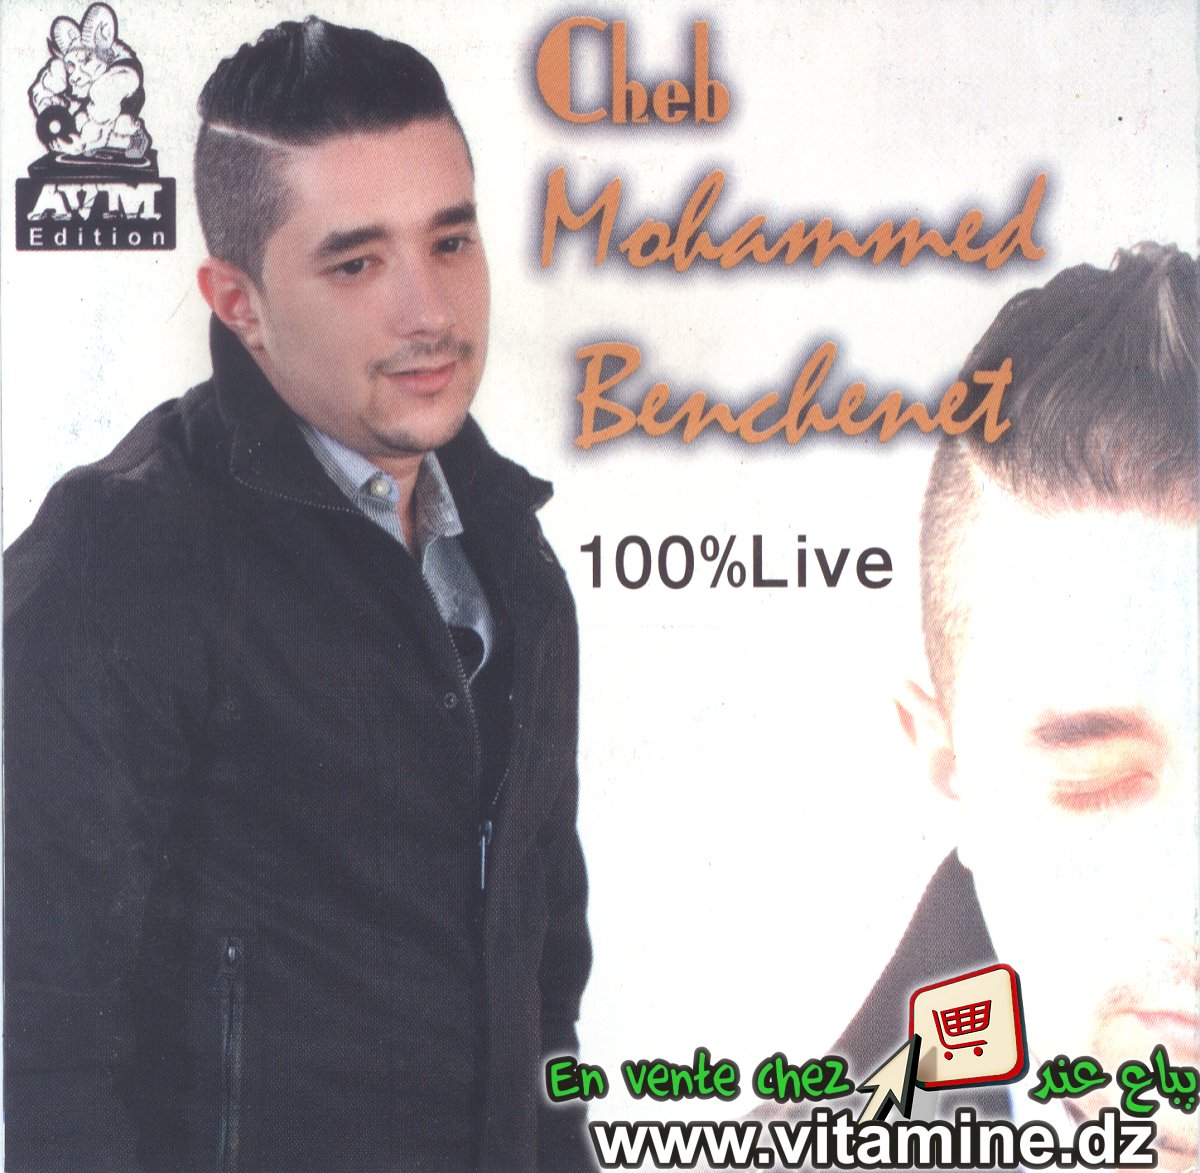 Cheb Mohammed Benchenet - 100% live